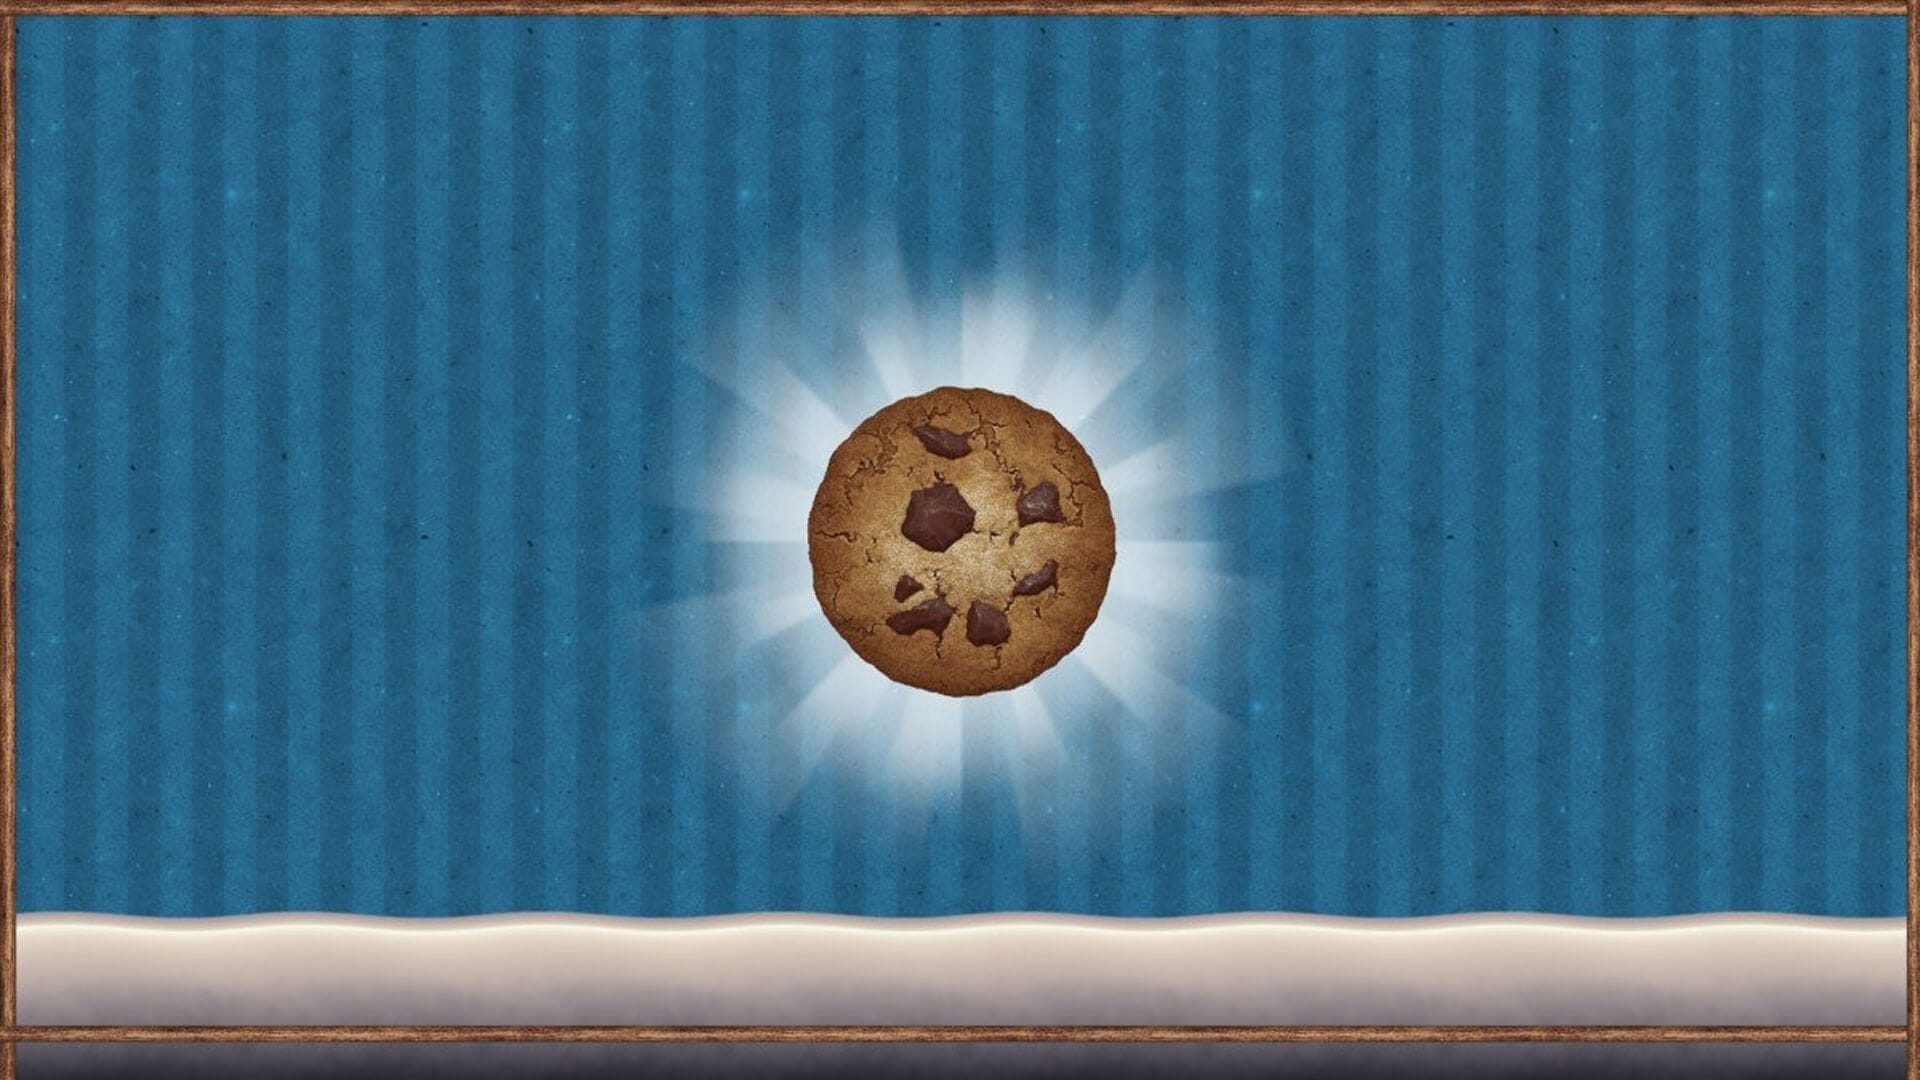 Smart Cookie Clicker Update Served Fresh To Your Game